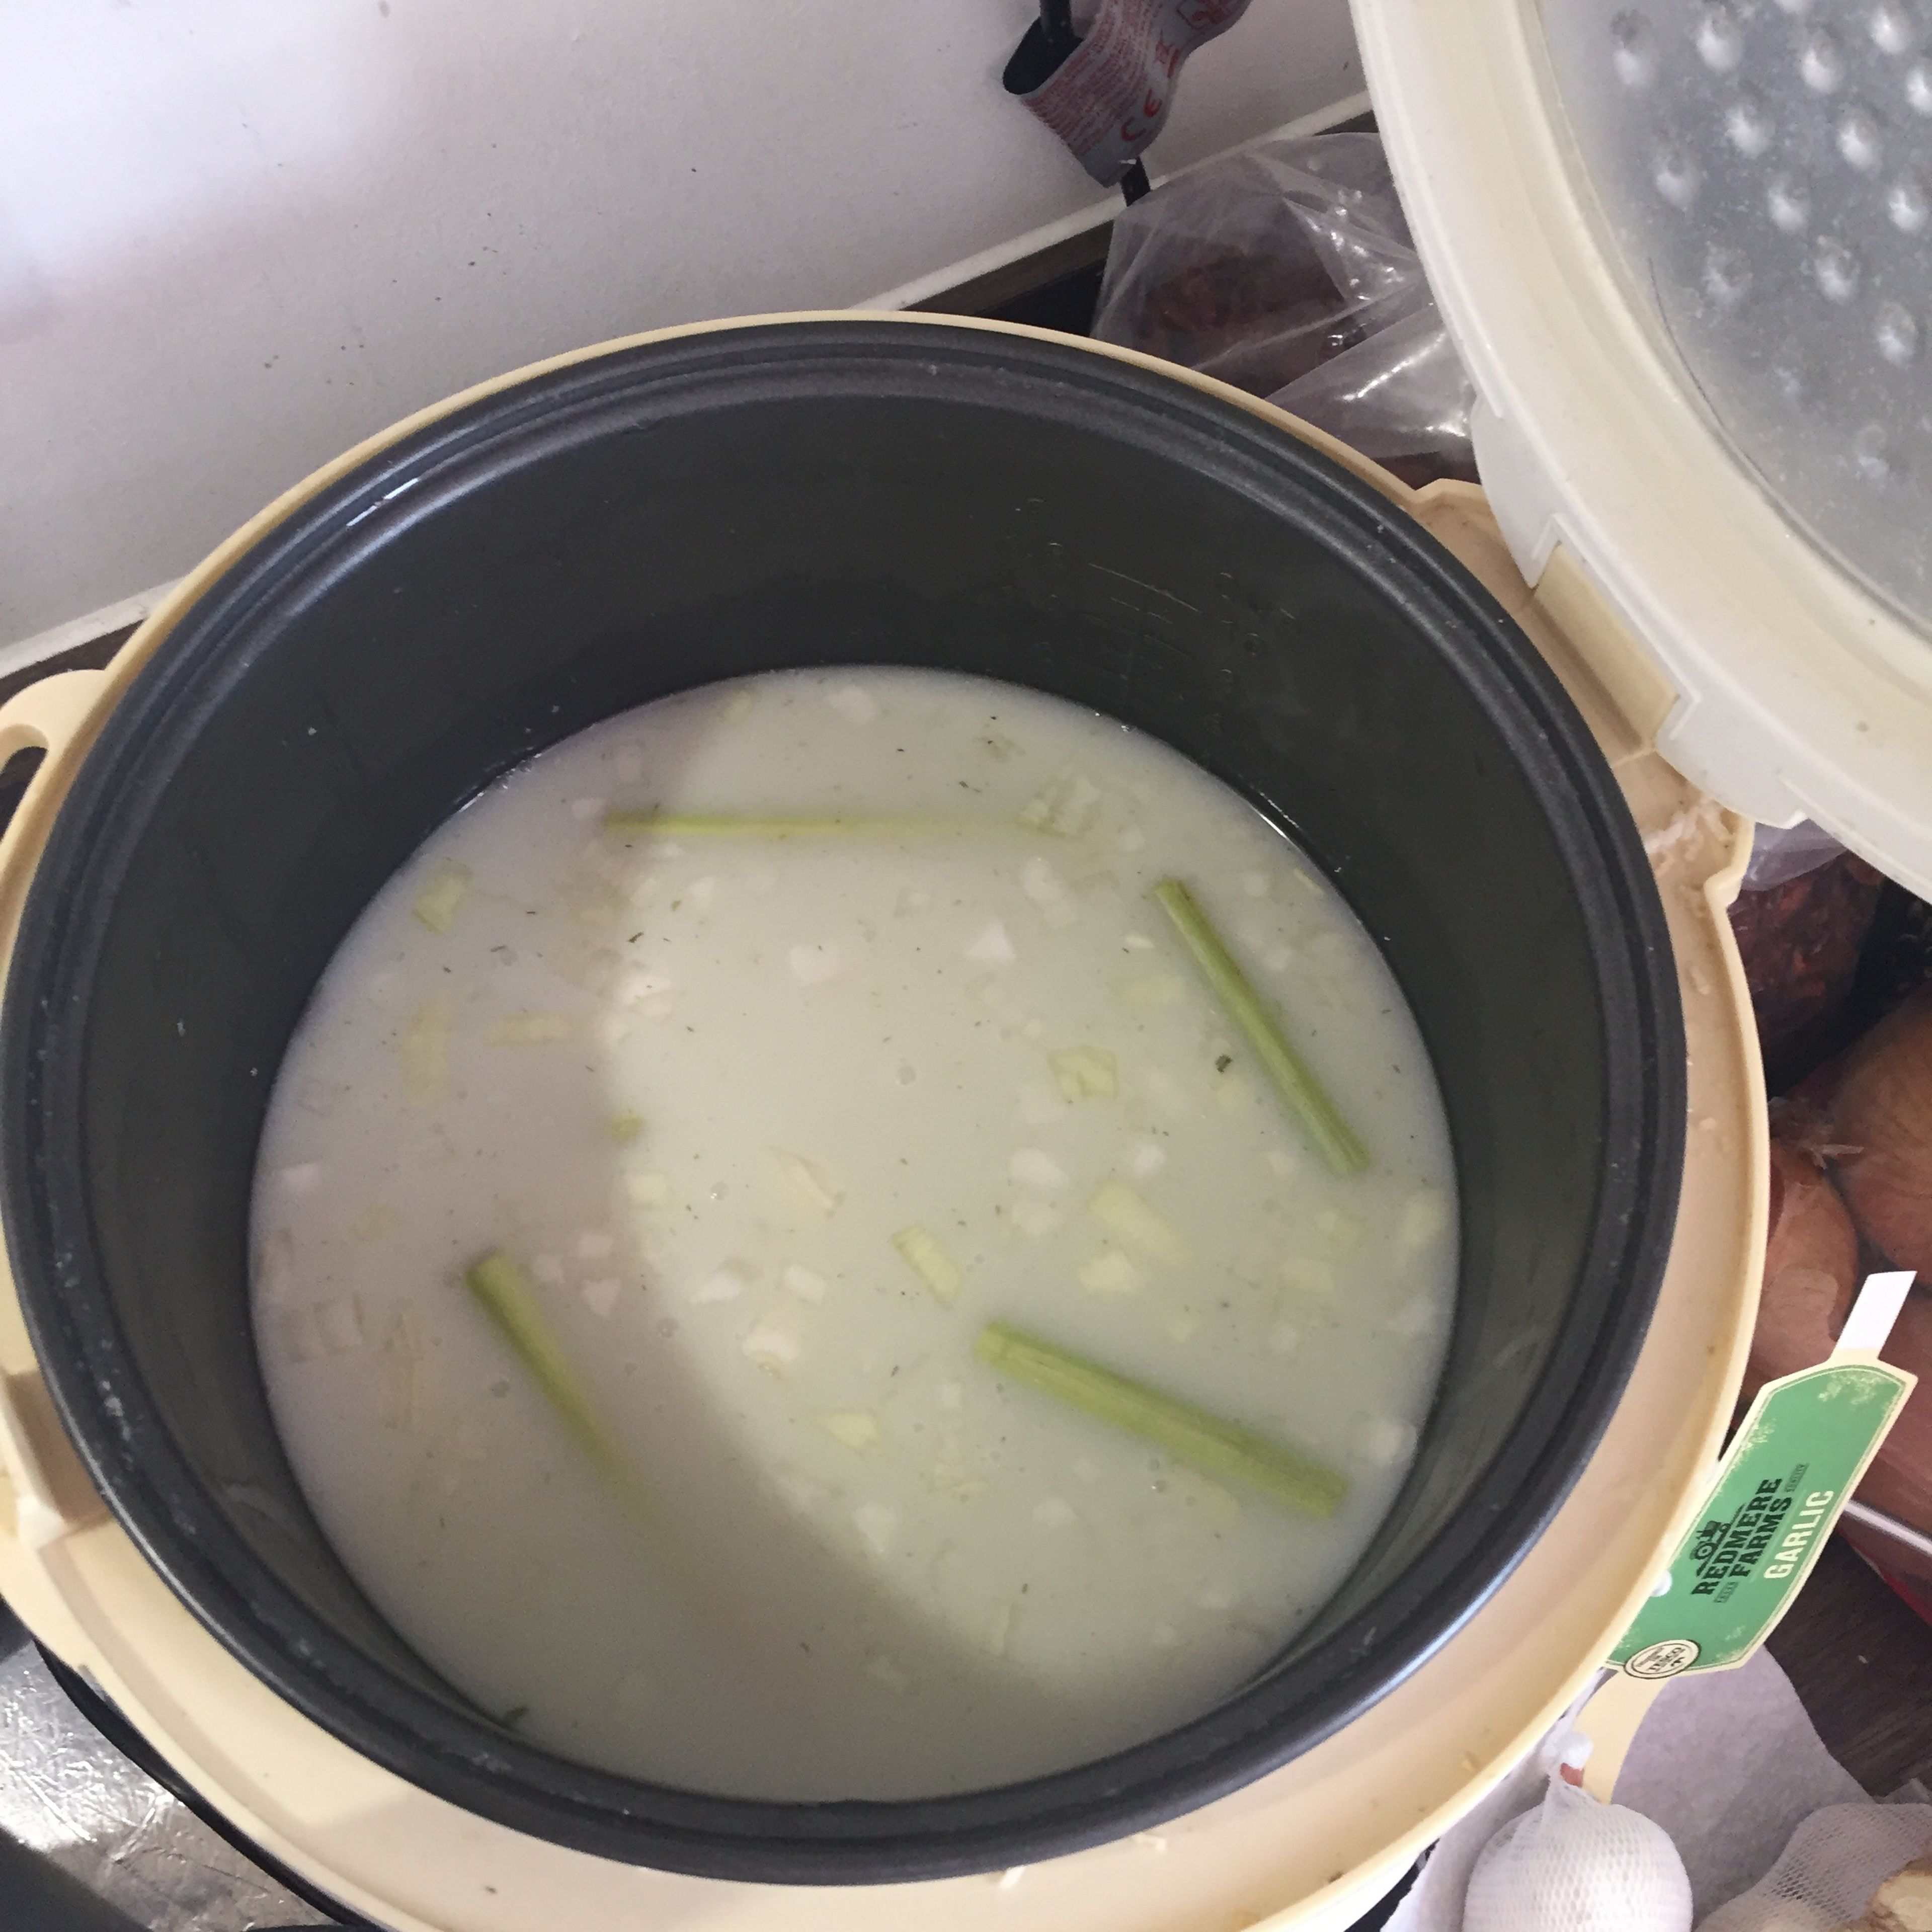 Then smash the lemongrass and cut it in half. Add it into the pot with the onions and coconut milk. Tie the pandan leaves into a knot and add it into the pot as well. Substitute for other forms such as 3-4 tsp of pandan powder